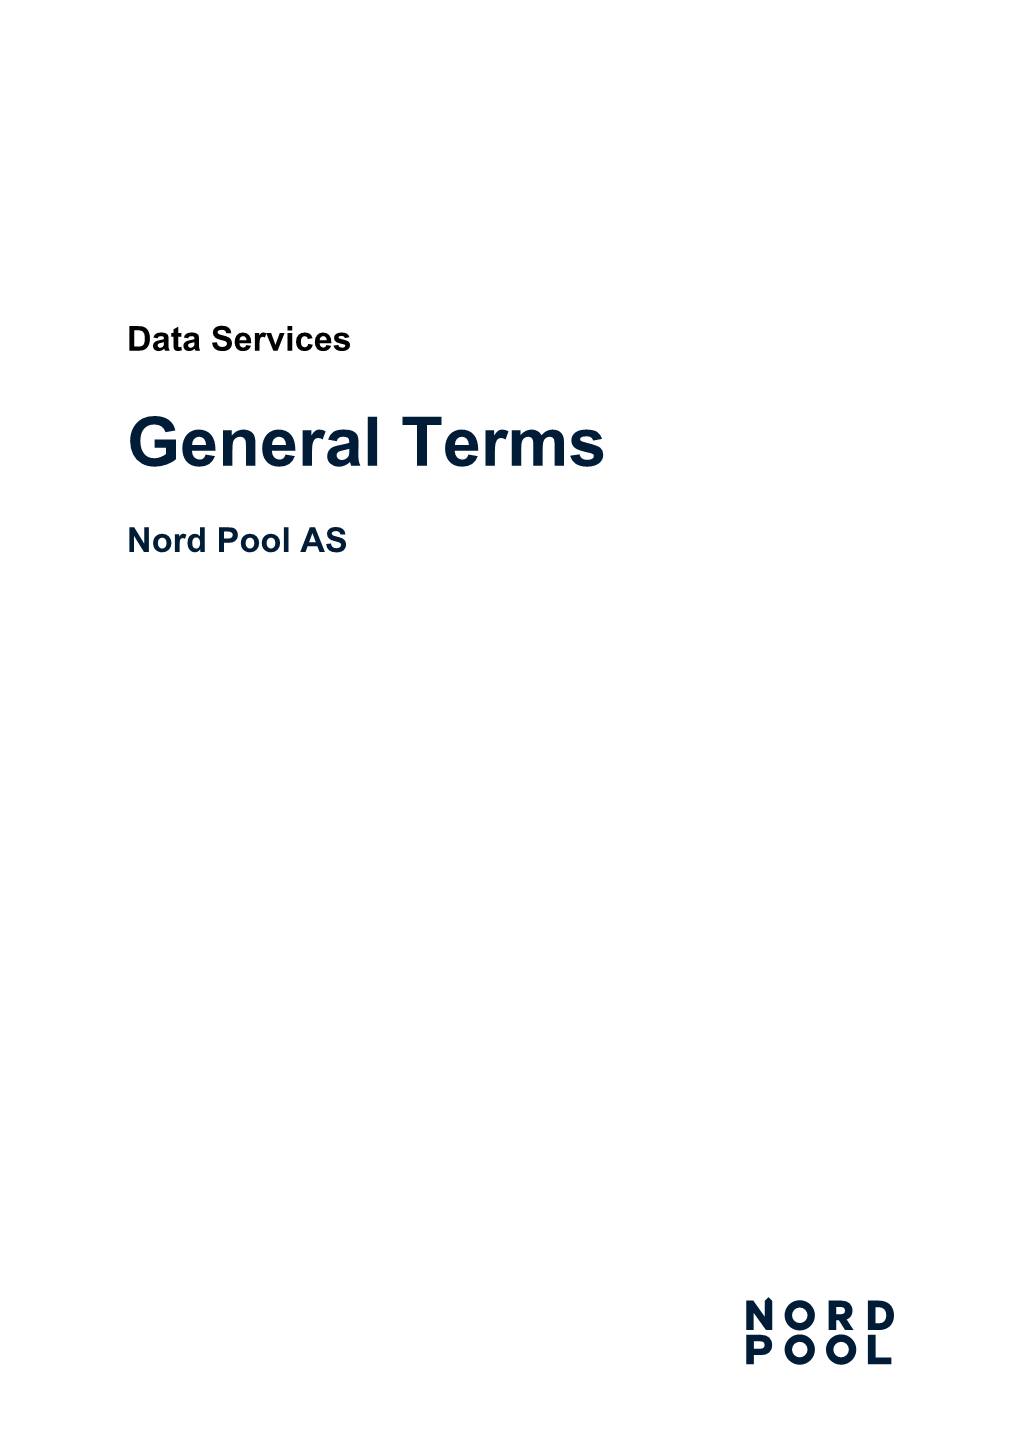 Data Services General Terms